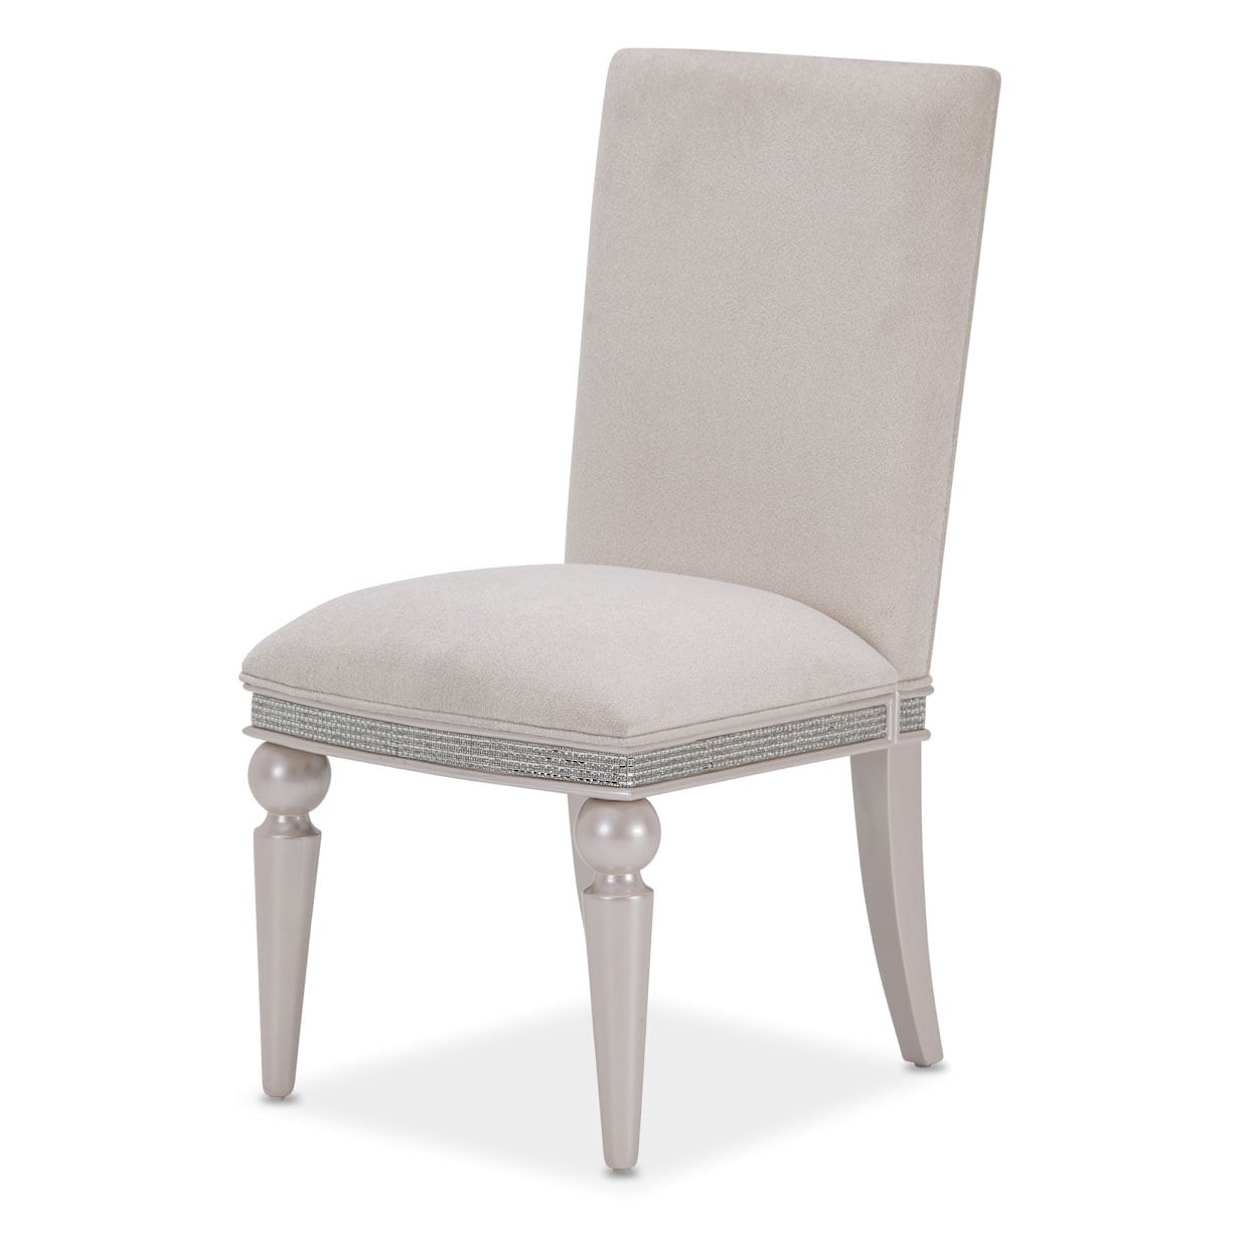 Michael Amini Glimmering Heights Upholstered Dining Side Chair